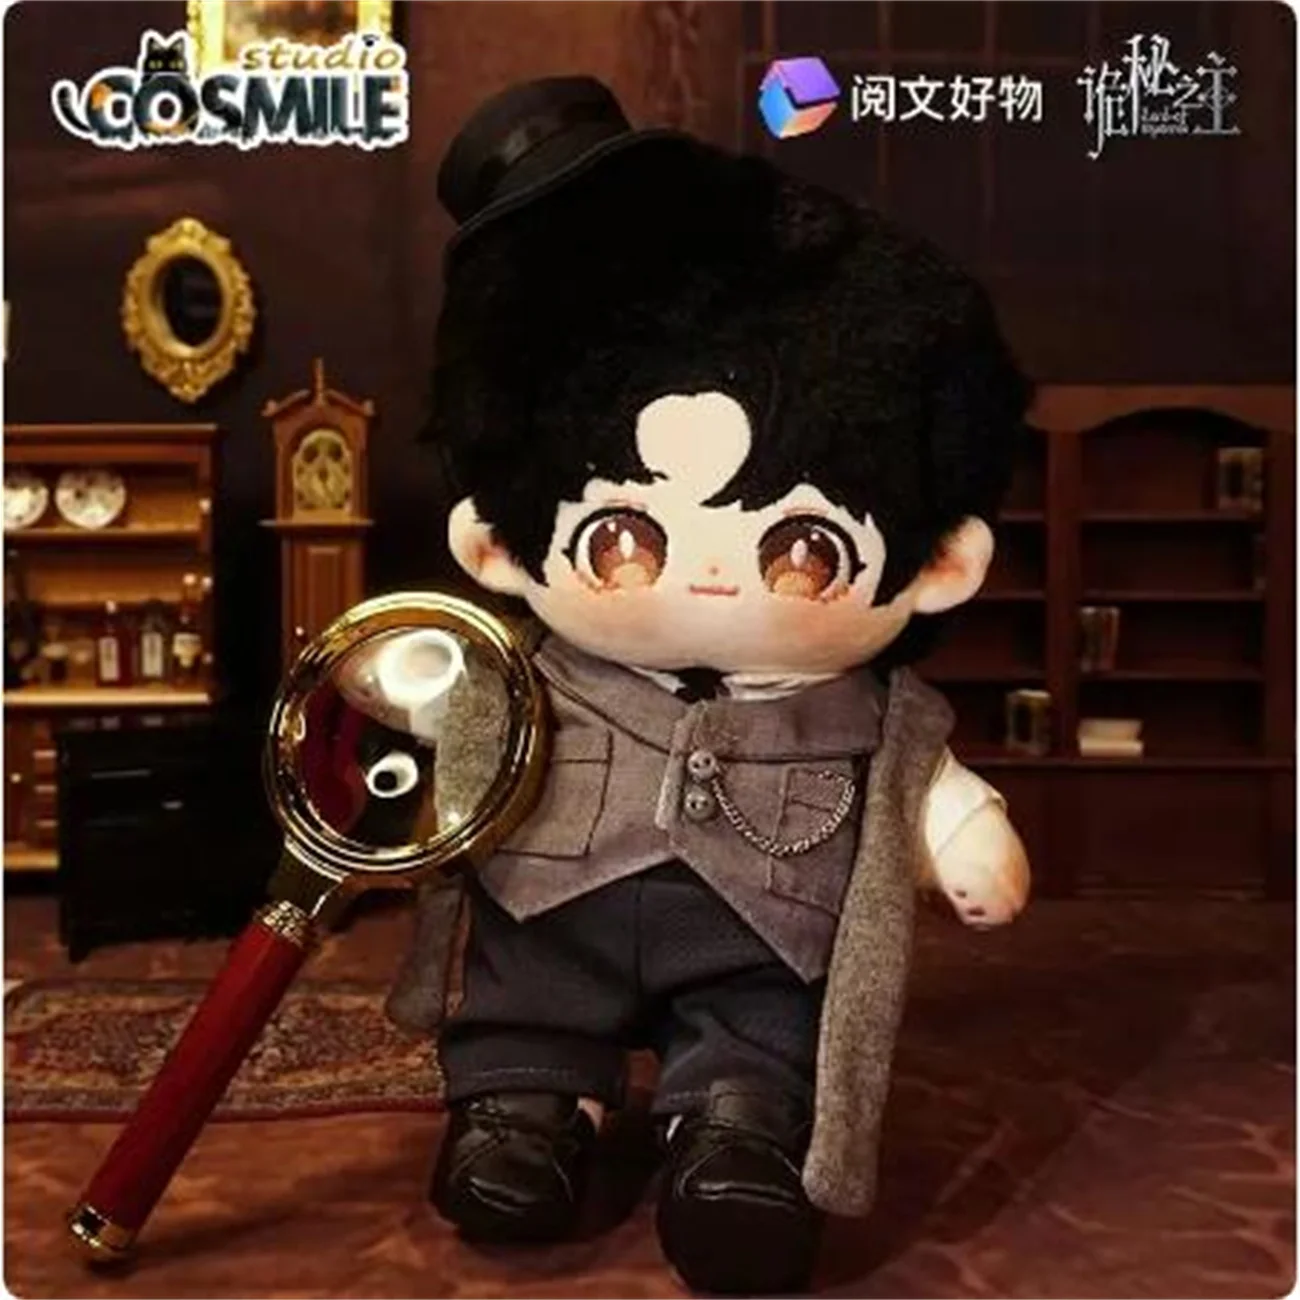 

Comic Lord of the Mysteries Official Original Klein Moretti Stuffed Plushie 20cm Plush Doll Body Clothes Costume Toy Sa YW